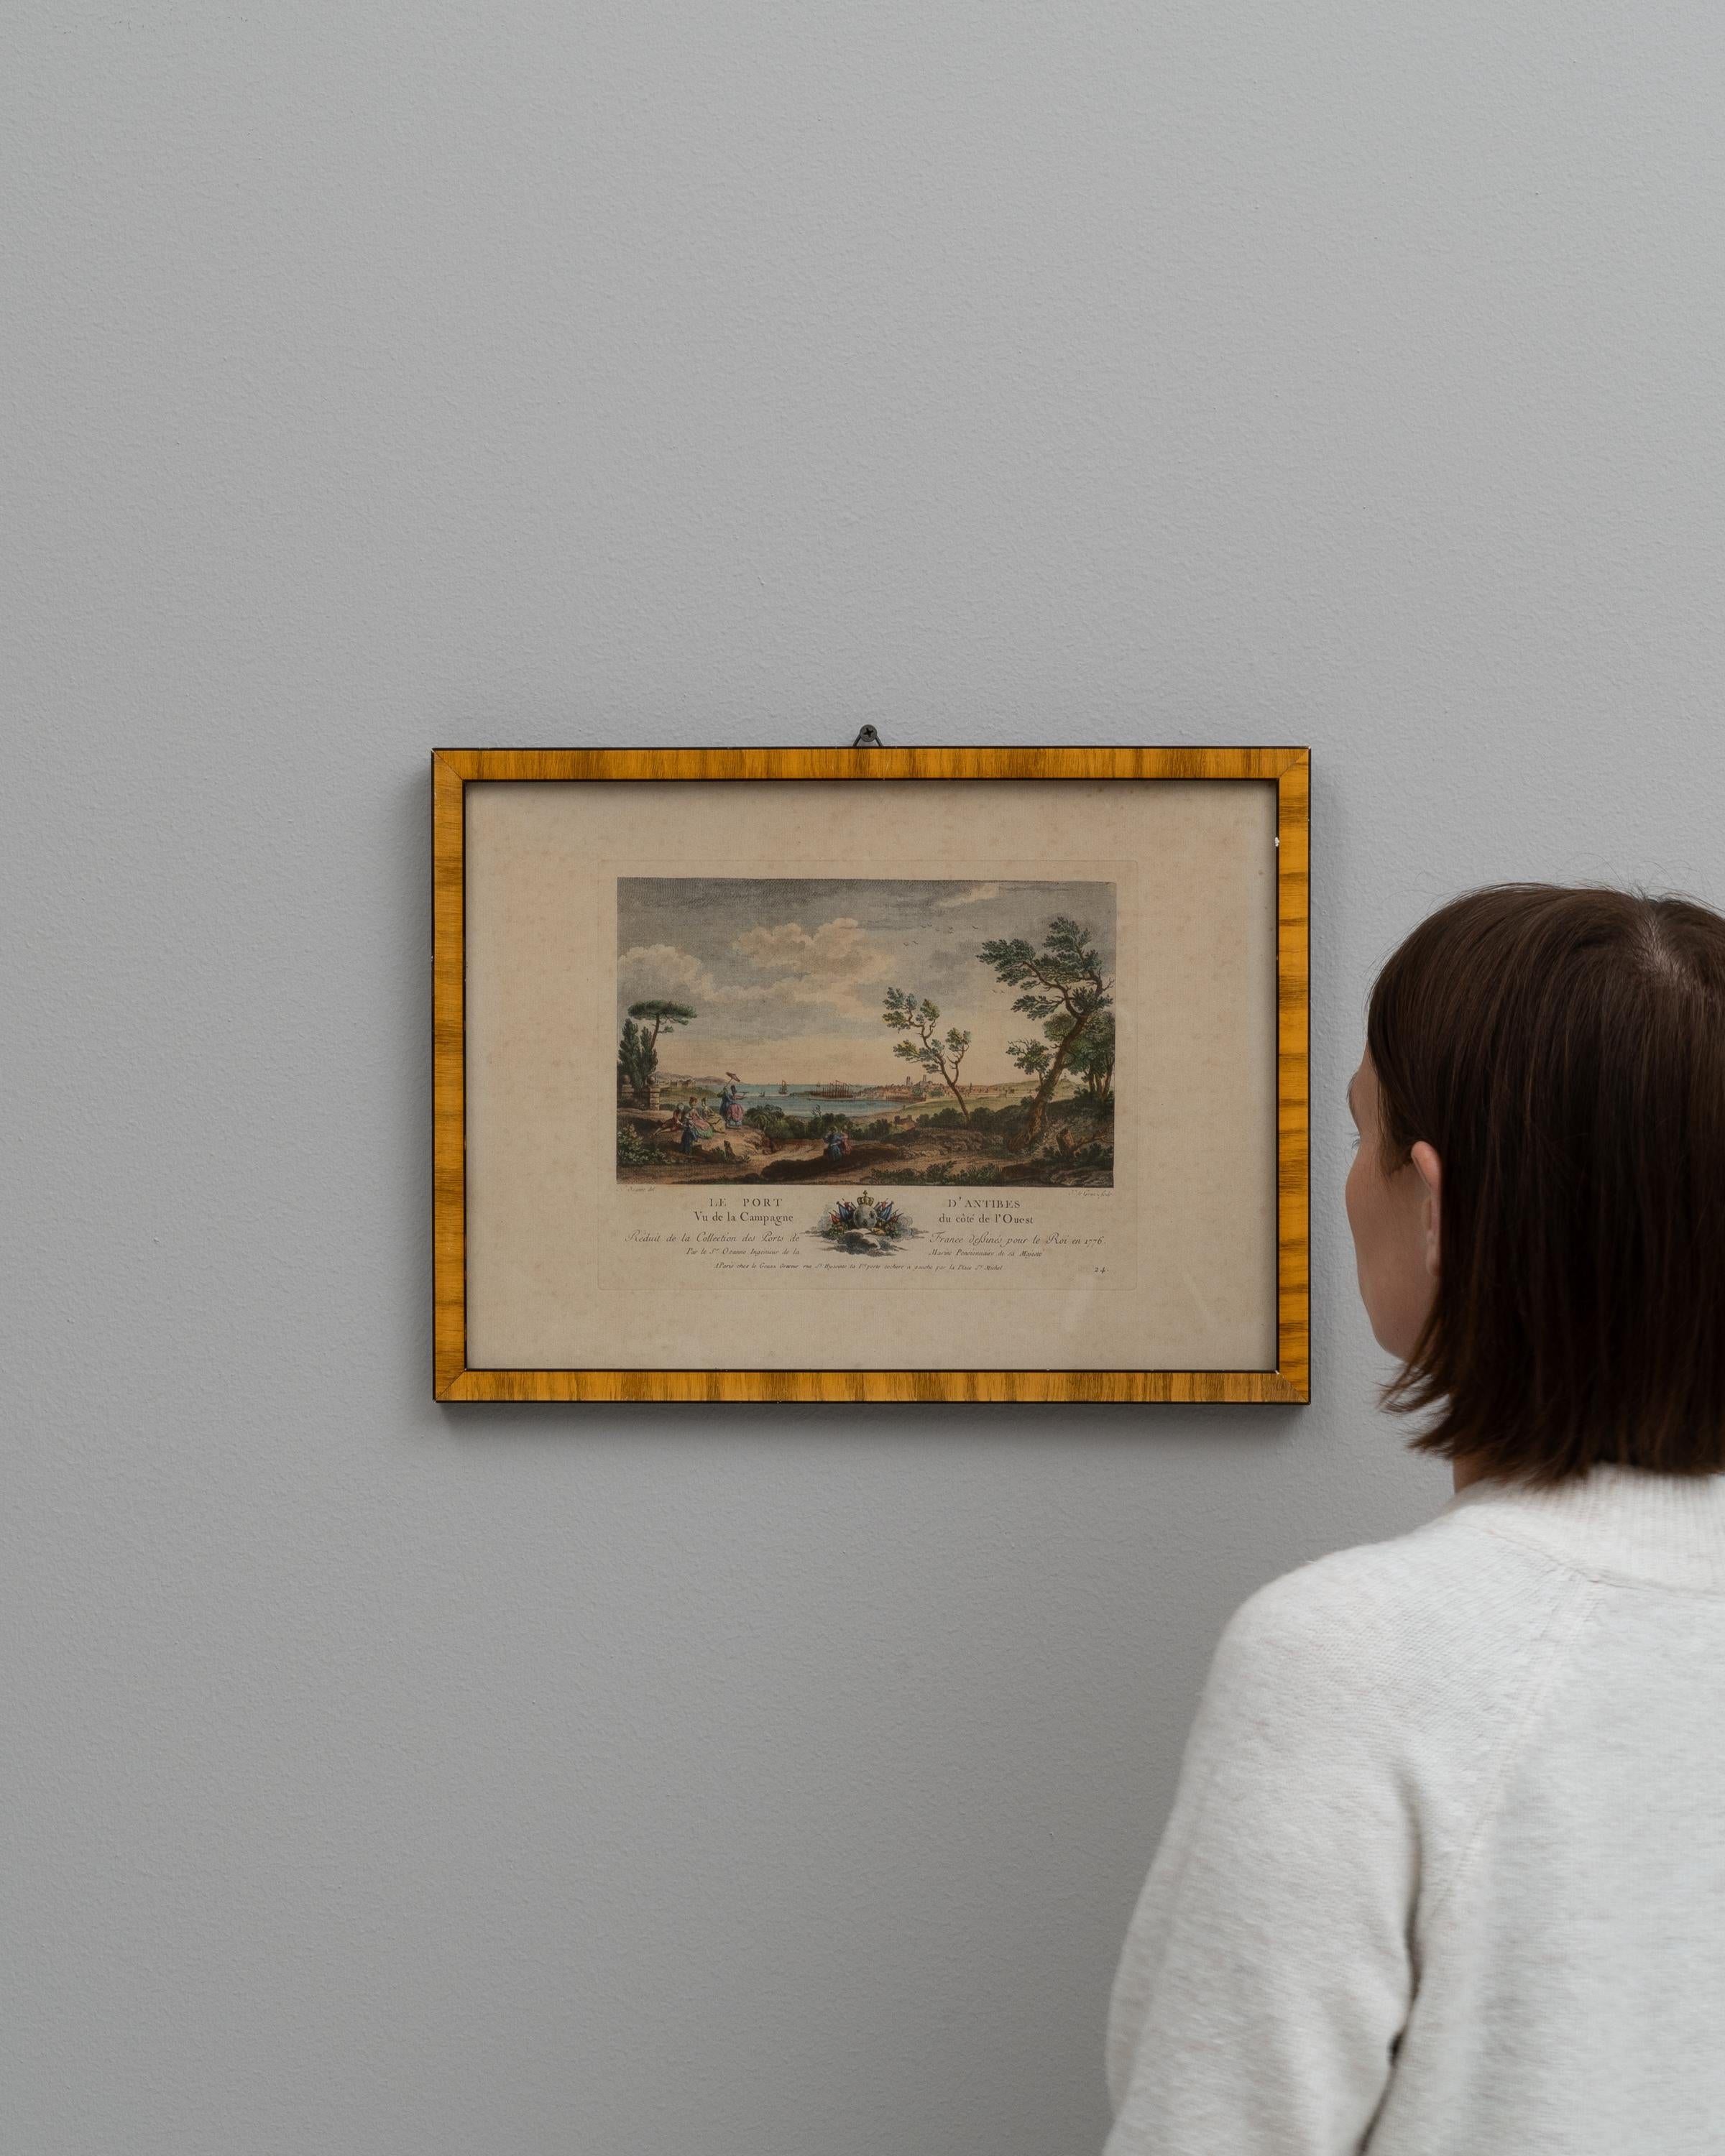 Discover the charm of classical art with this 19th Century French artwork, beautifully encapsulated within a finely crafted wooden frame. This delicate piece captures a serene pastoral scene, portraying figures amidst a lush landscape under a softly